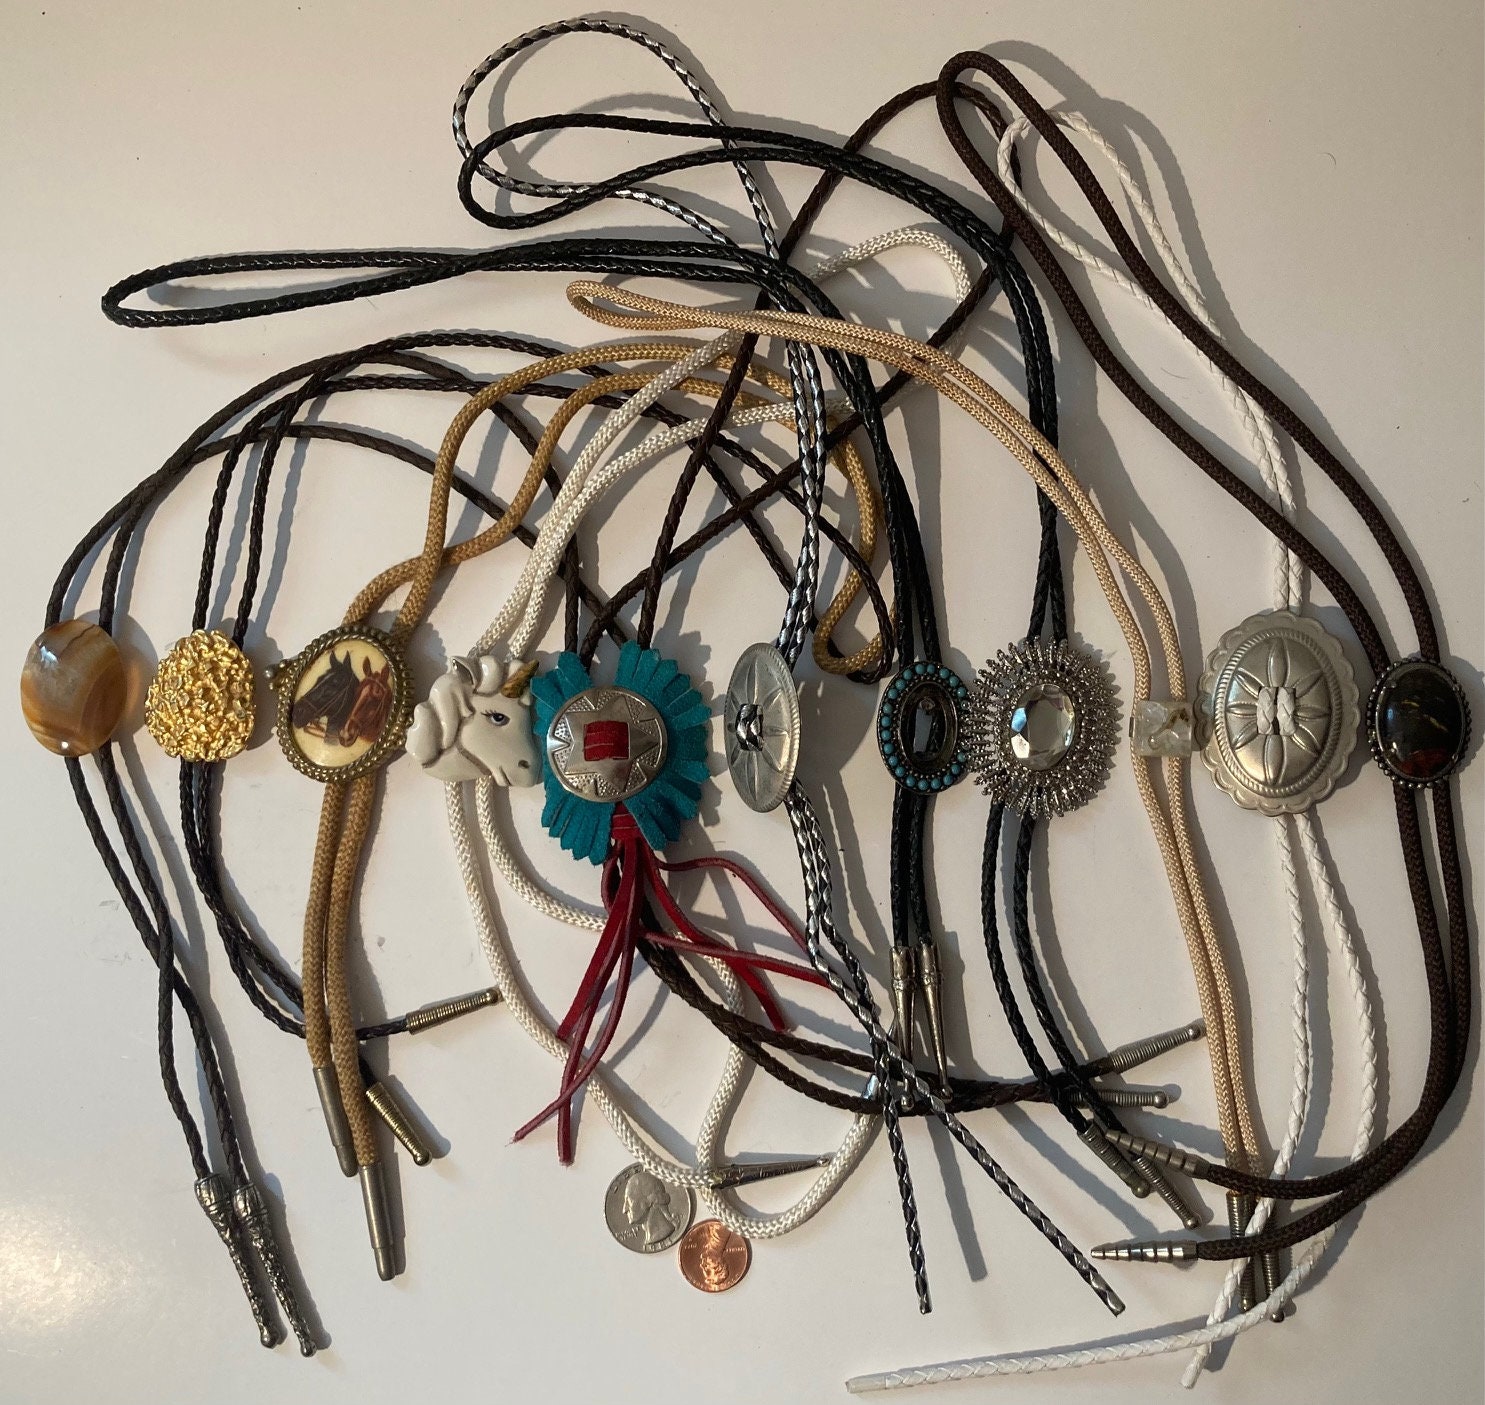 12 Pairs Bolo Tie Ends, Vintage Bolo Tie Tips, Bolo Tie Supplies, Gold & Silver Varieties, Bolo Ties Making